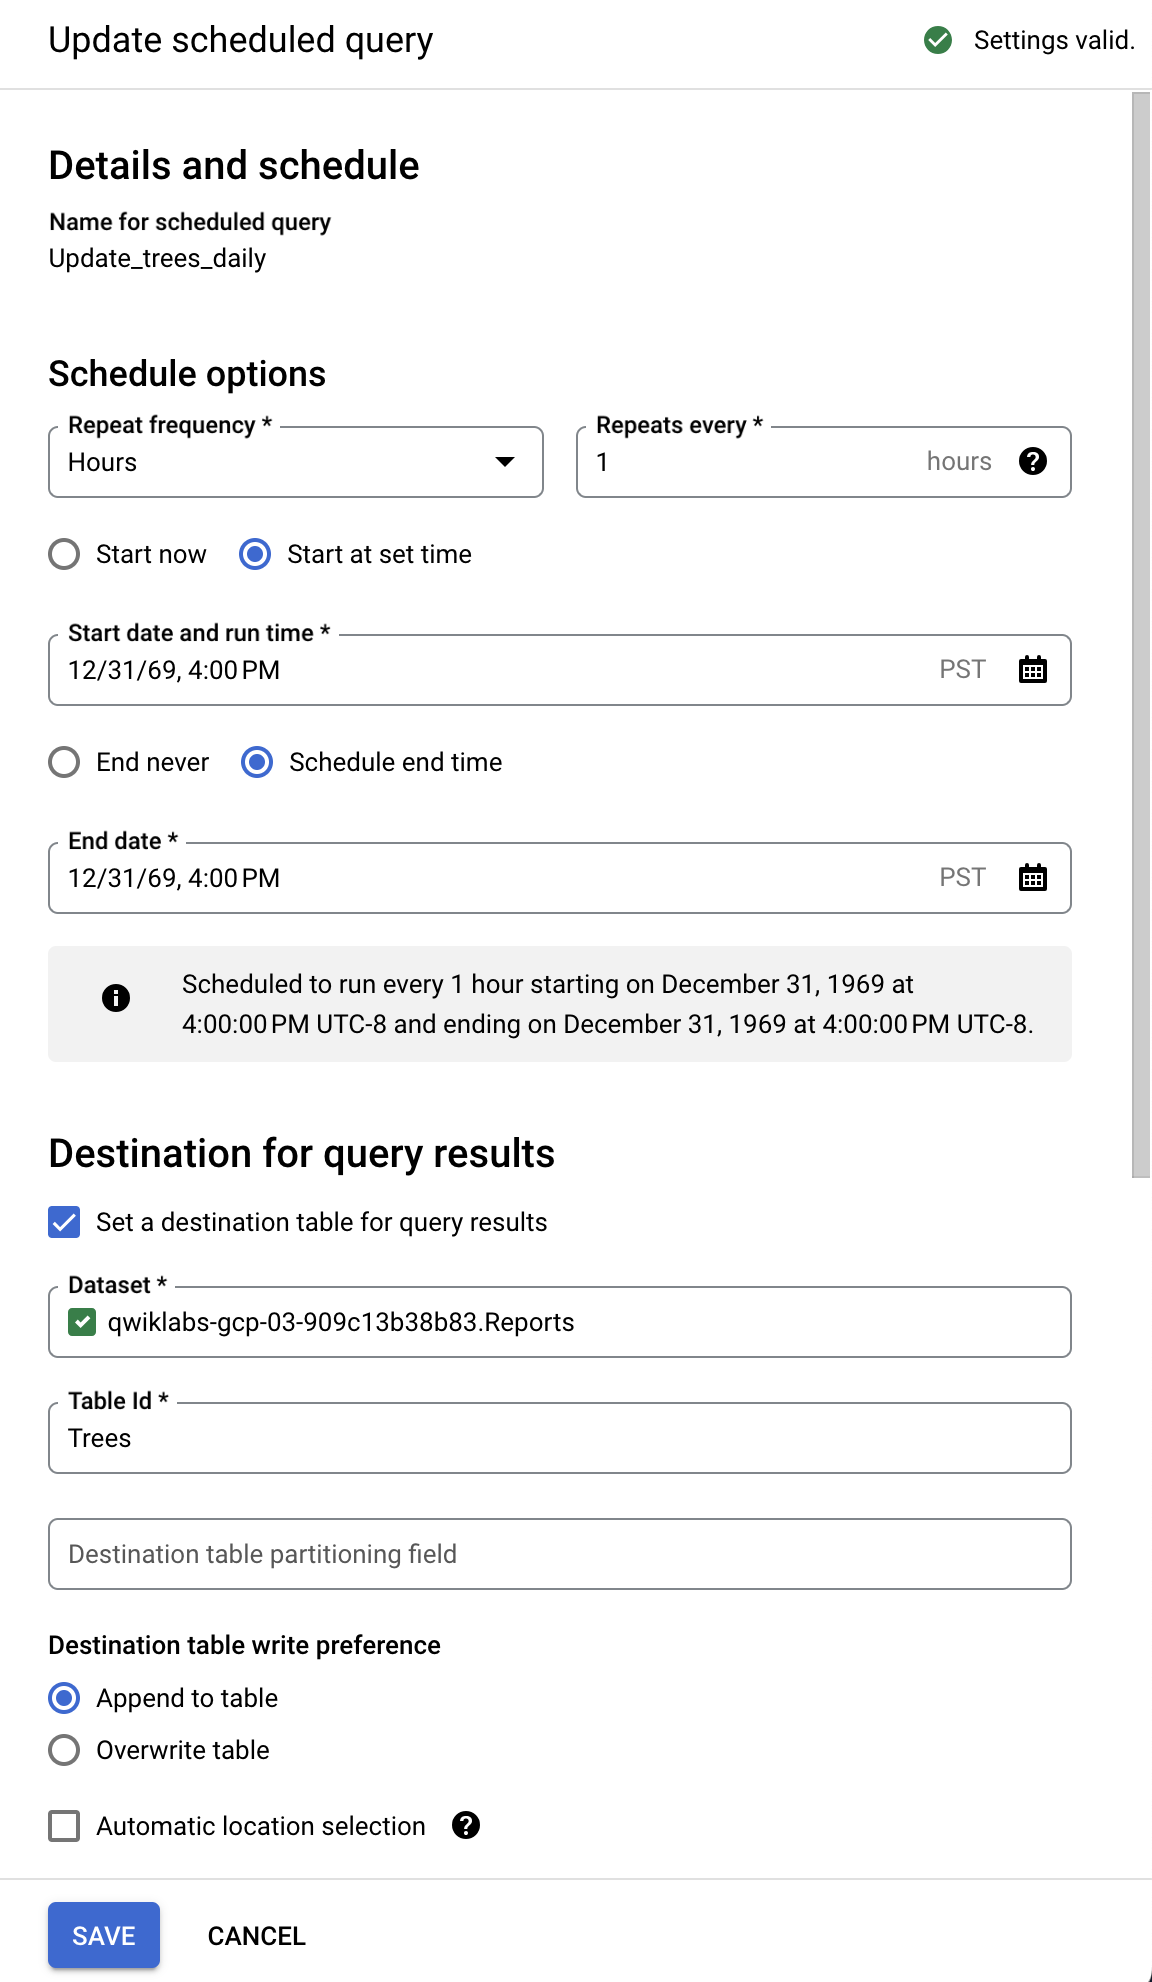 The New Scheduled Query dialog box displaying the updated details